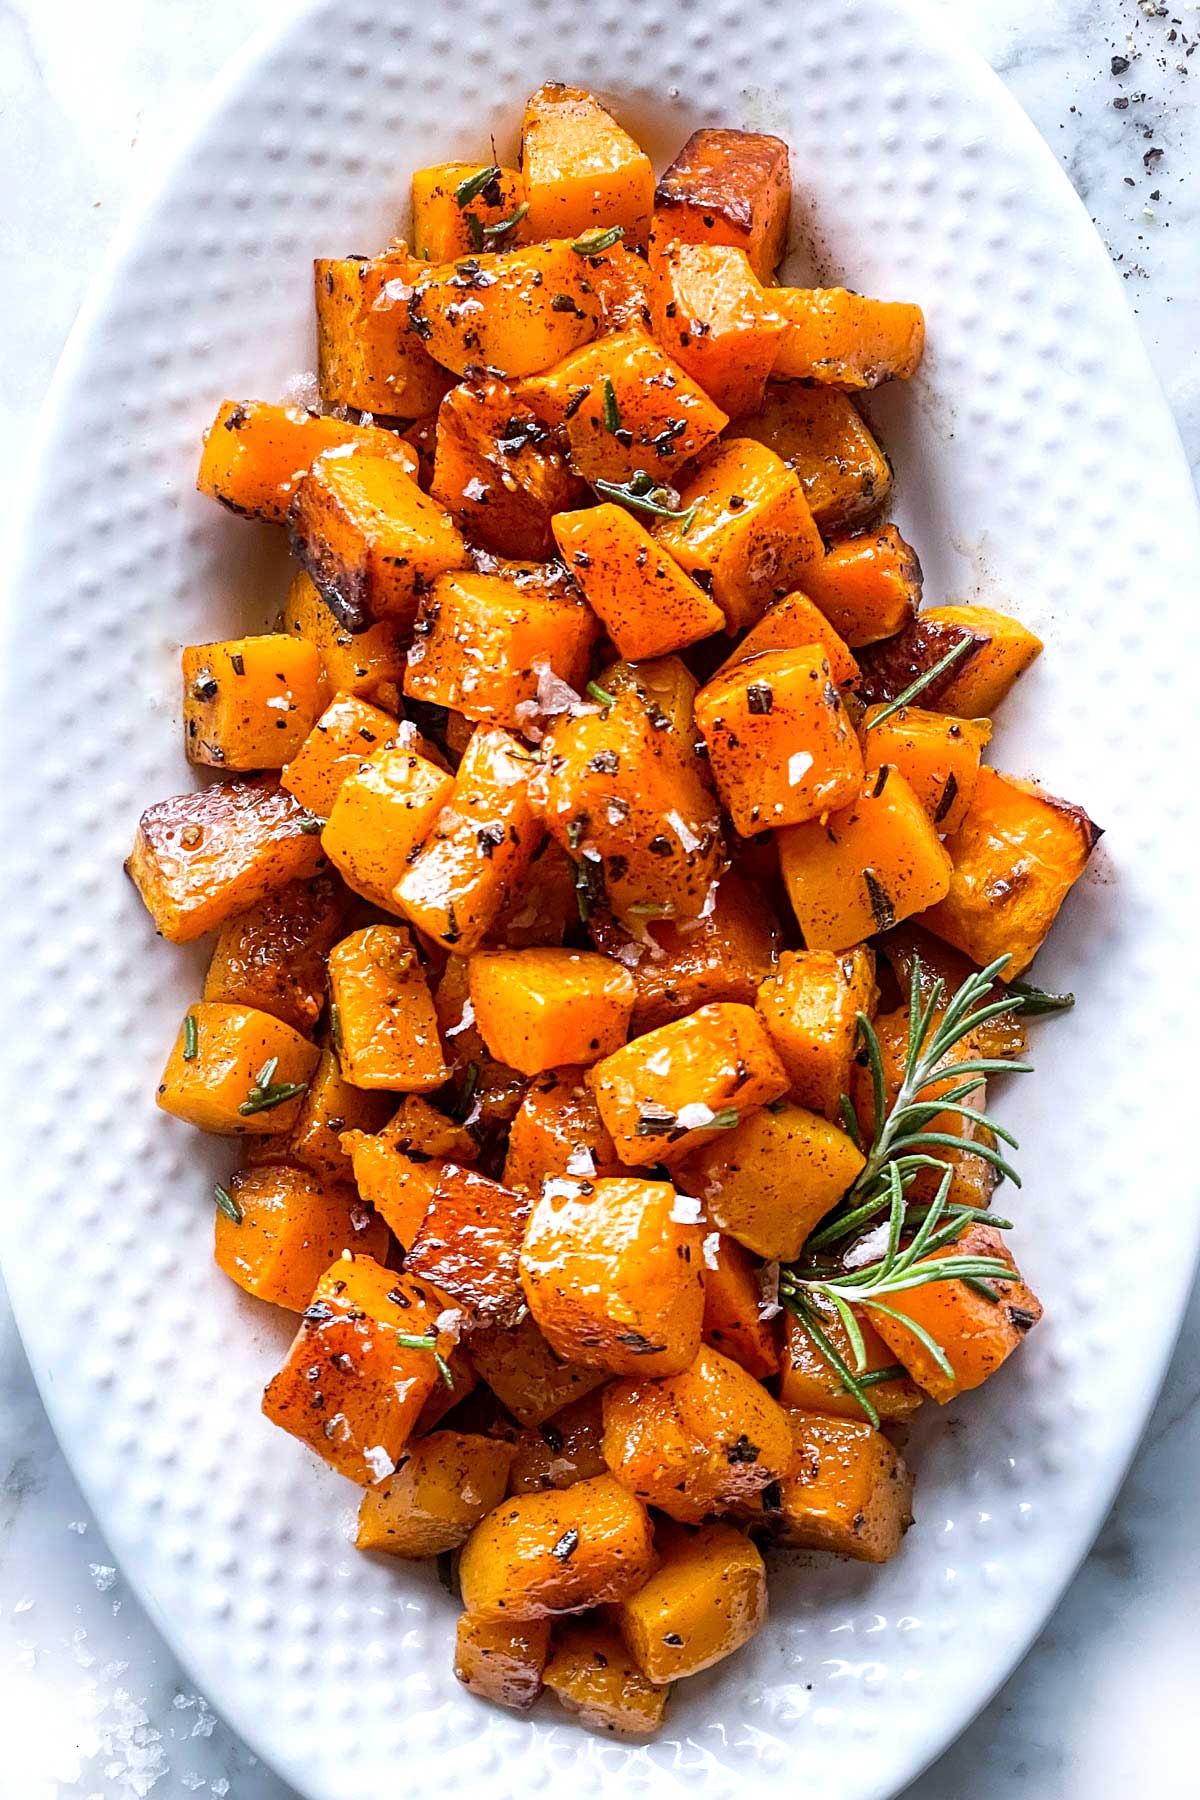 Roasted Butternut Squash with Maple Browned Butter foodiecrush.com